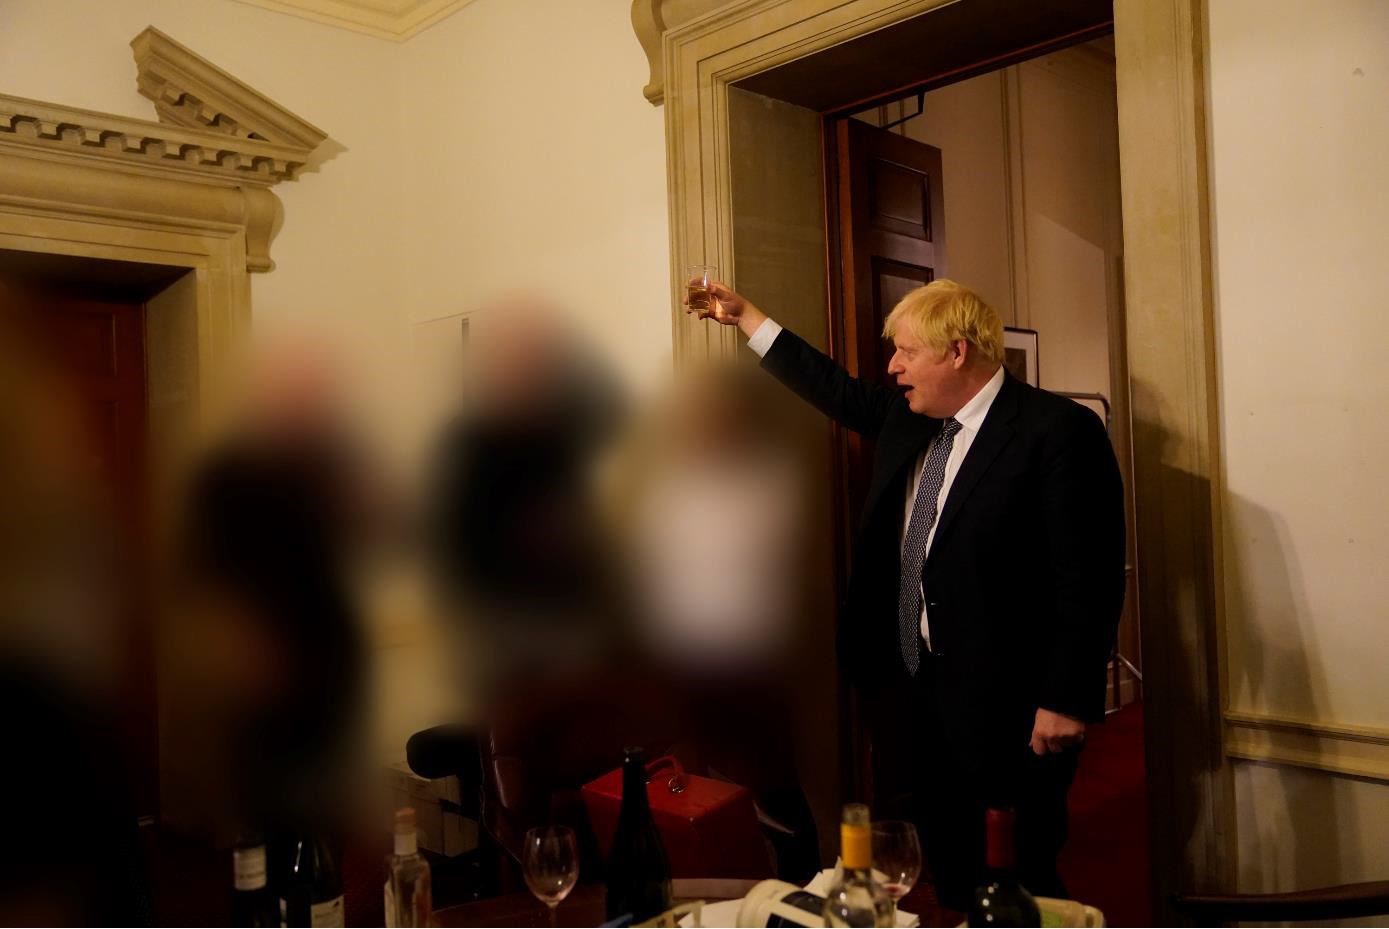 Boris Johnson at a gathering in 10 Downing Street (Sue Gray Report/Cabinet Office)